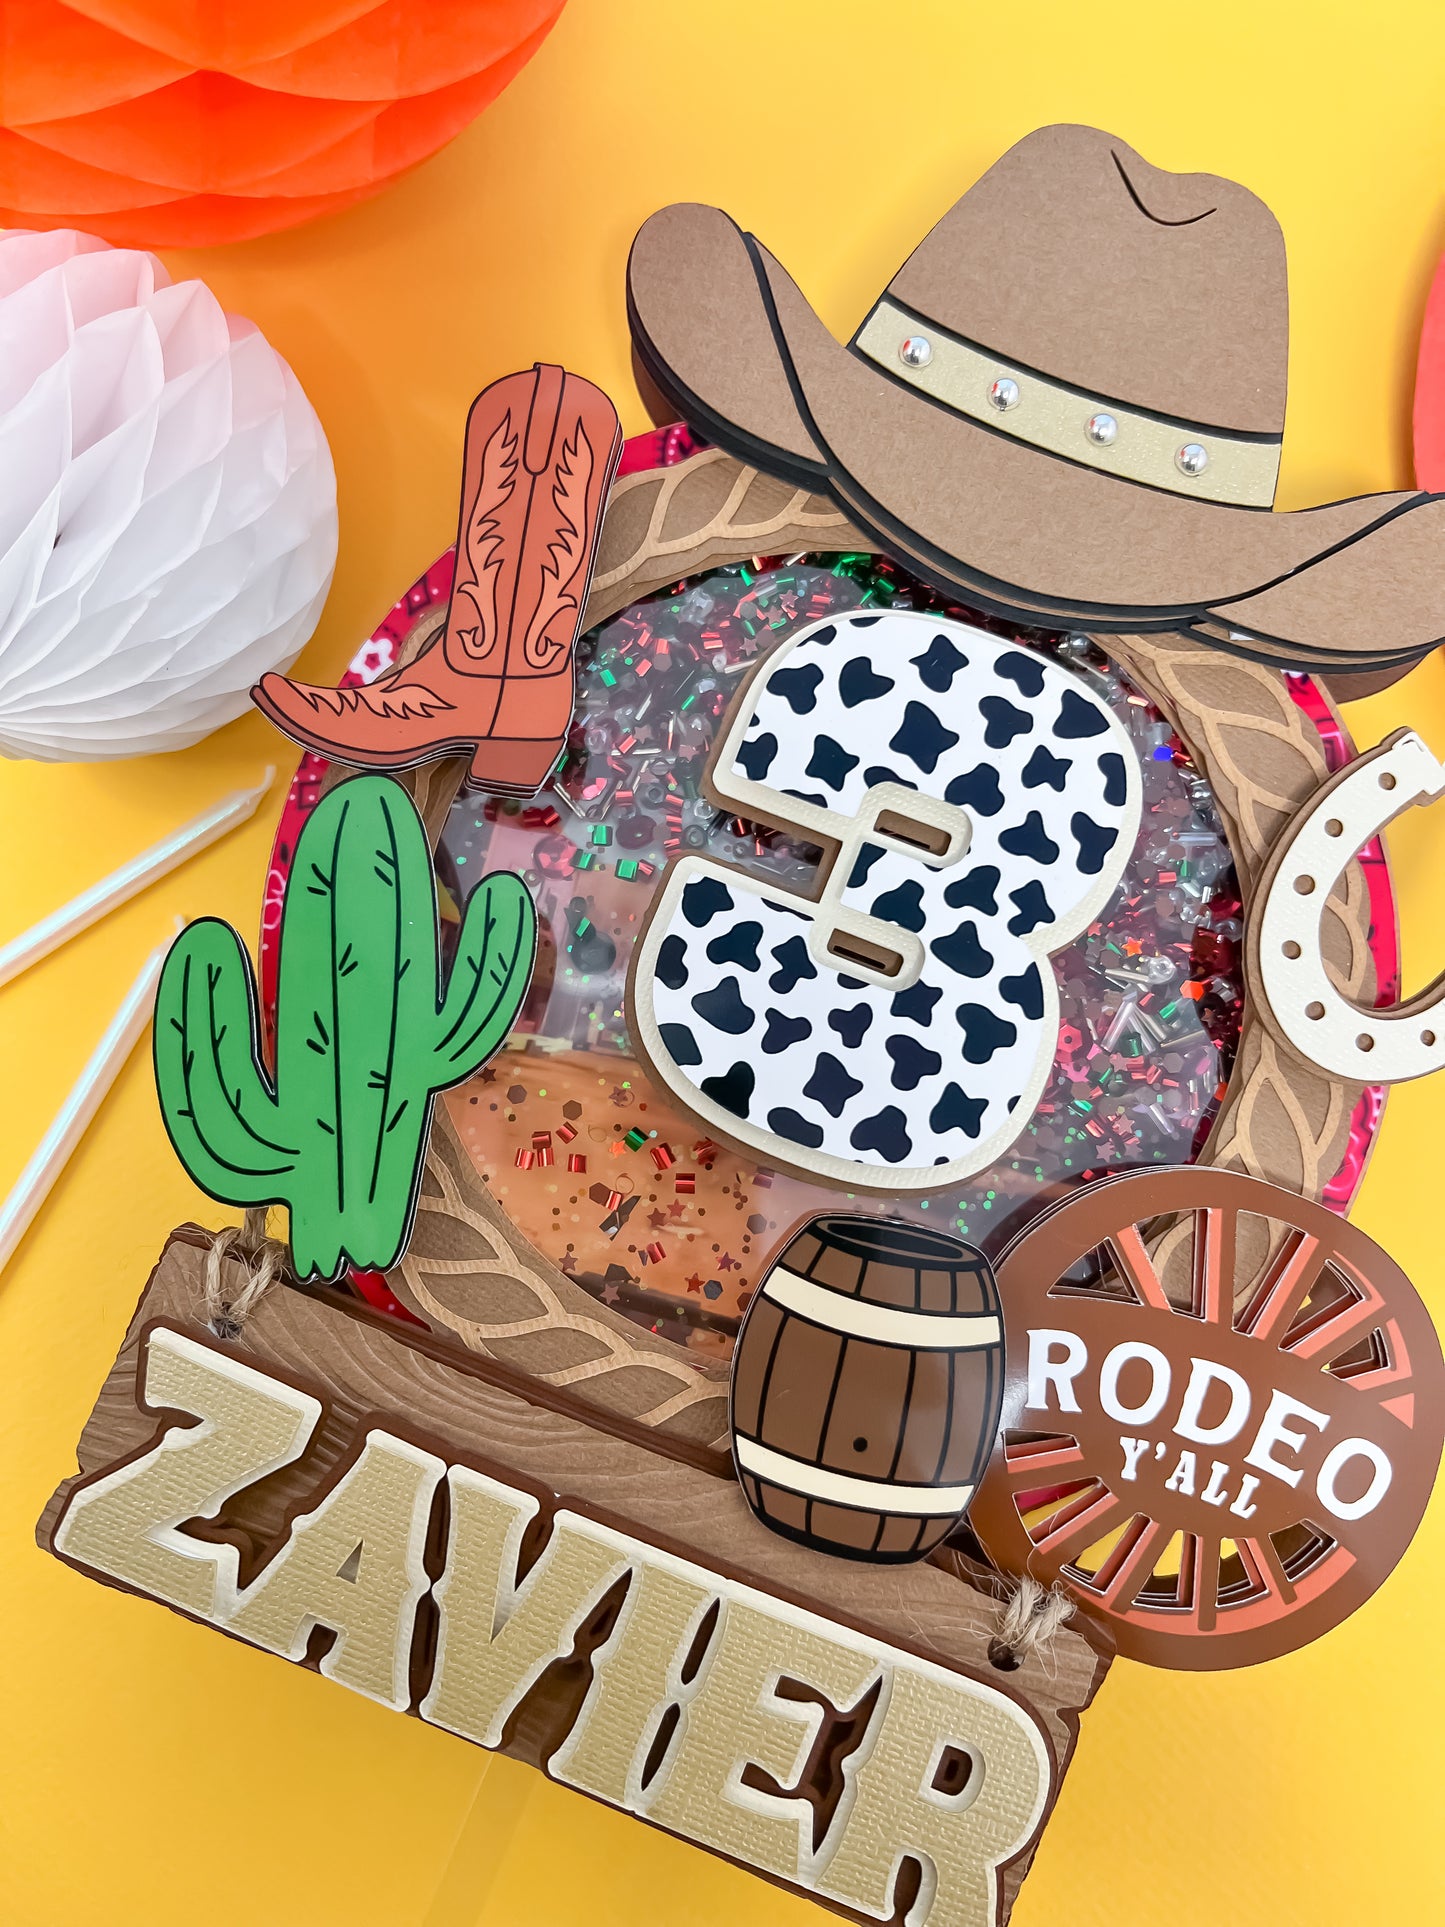 Rodeo Cake Topper, My First Rodeo Birthday Cake Topper